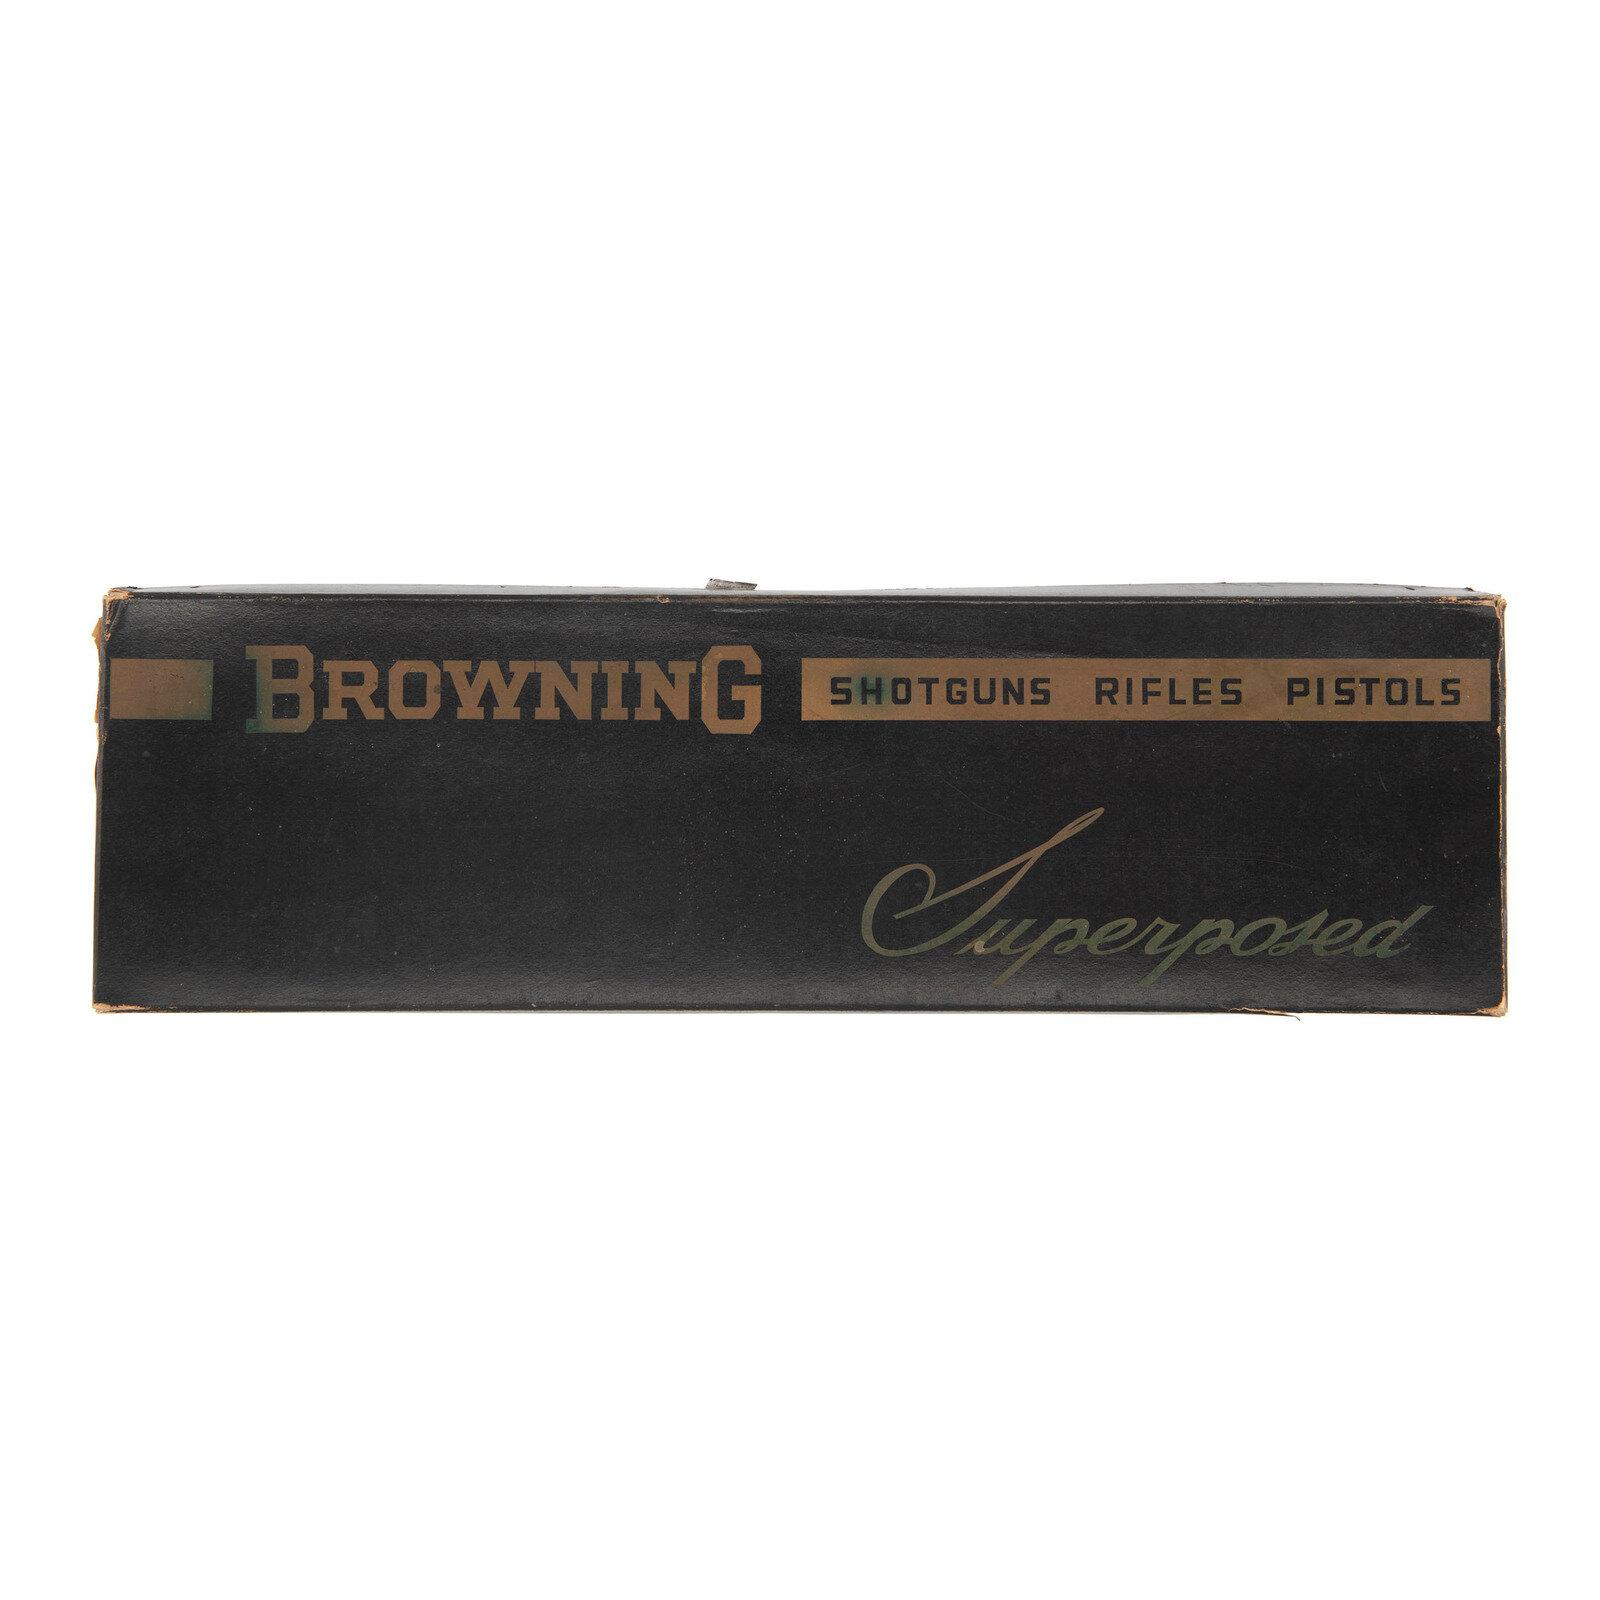 **Browning Superposed Lightning 20 Gauge with Leather Case and Original Box